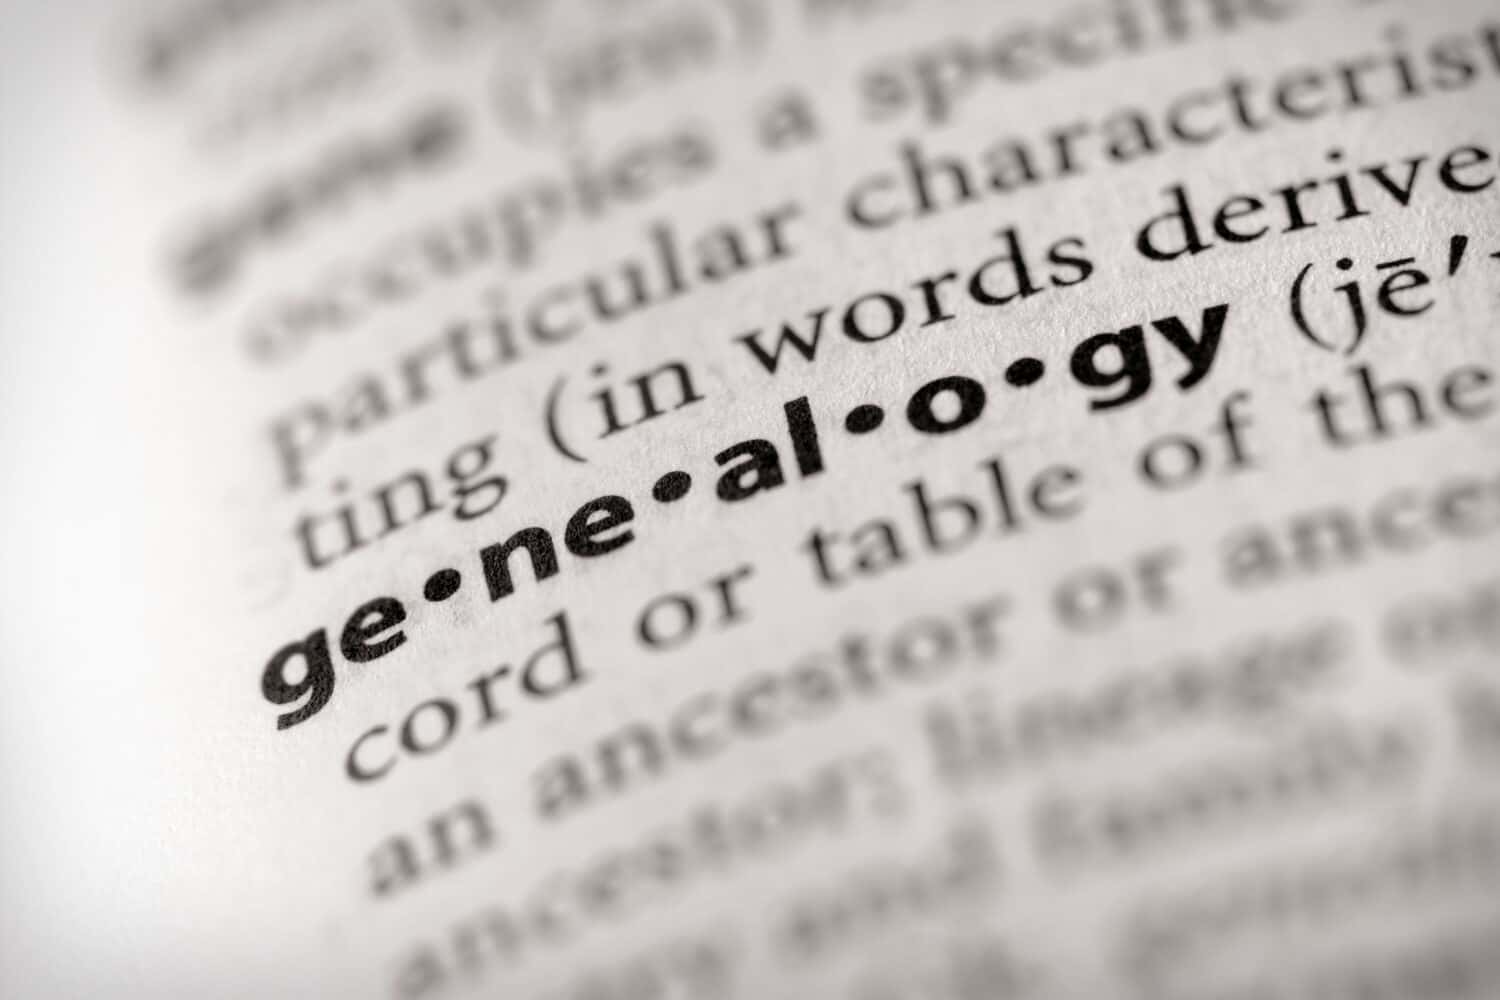 Selective focus on the word "genealogy".